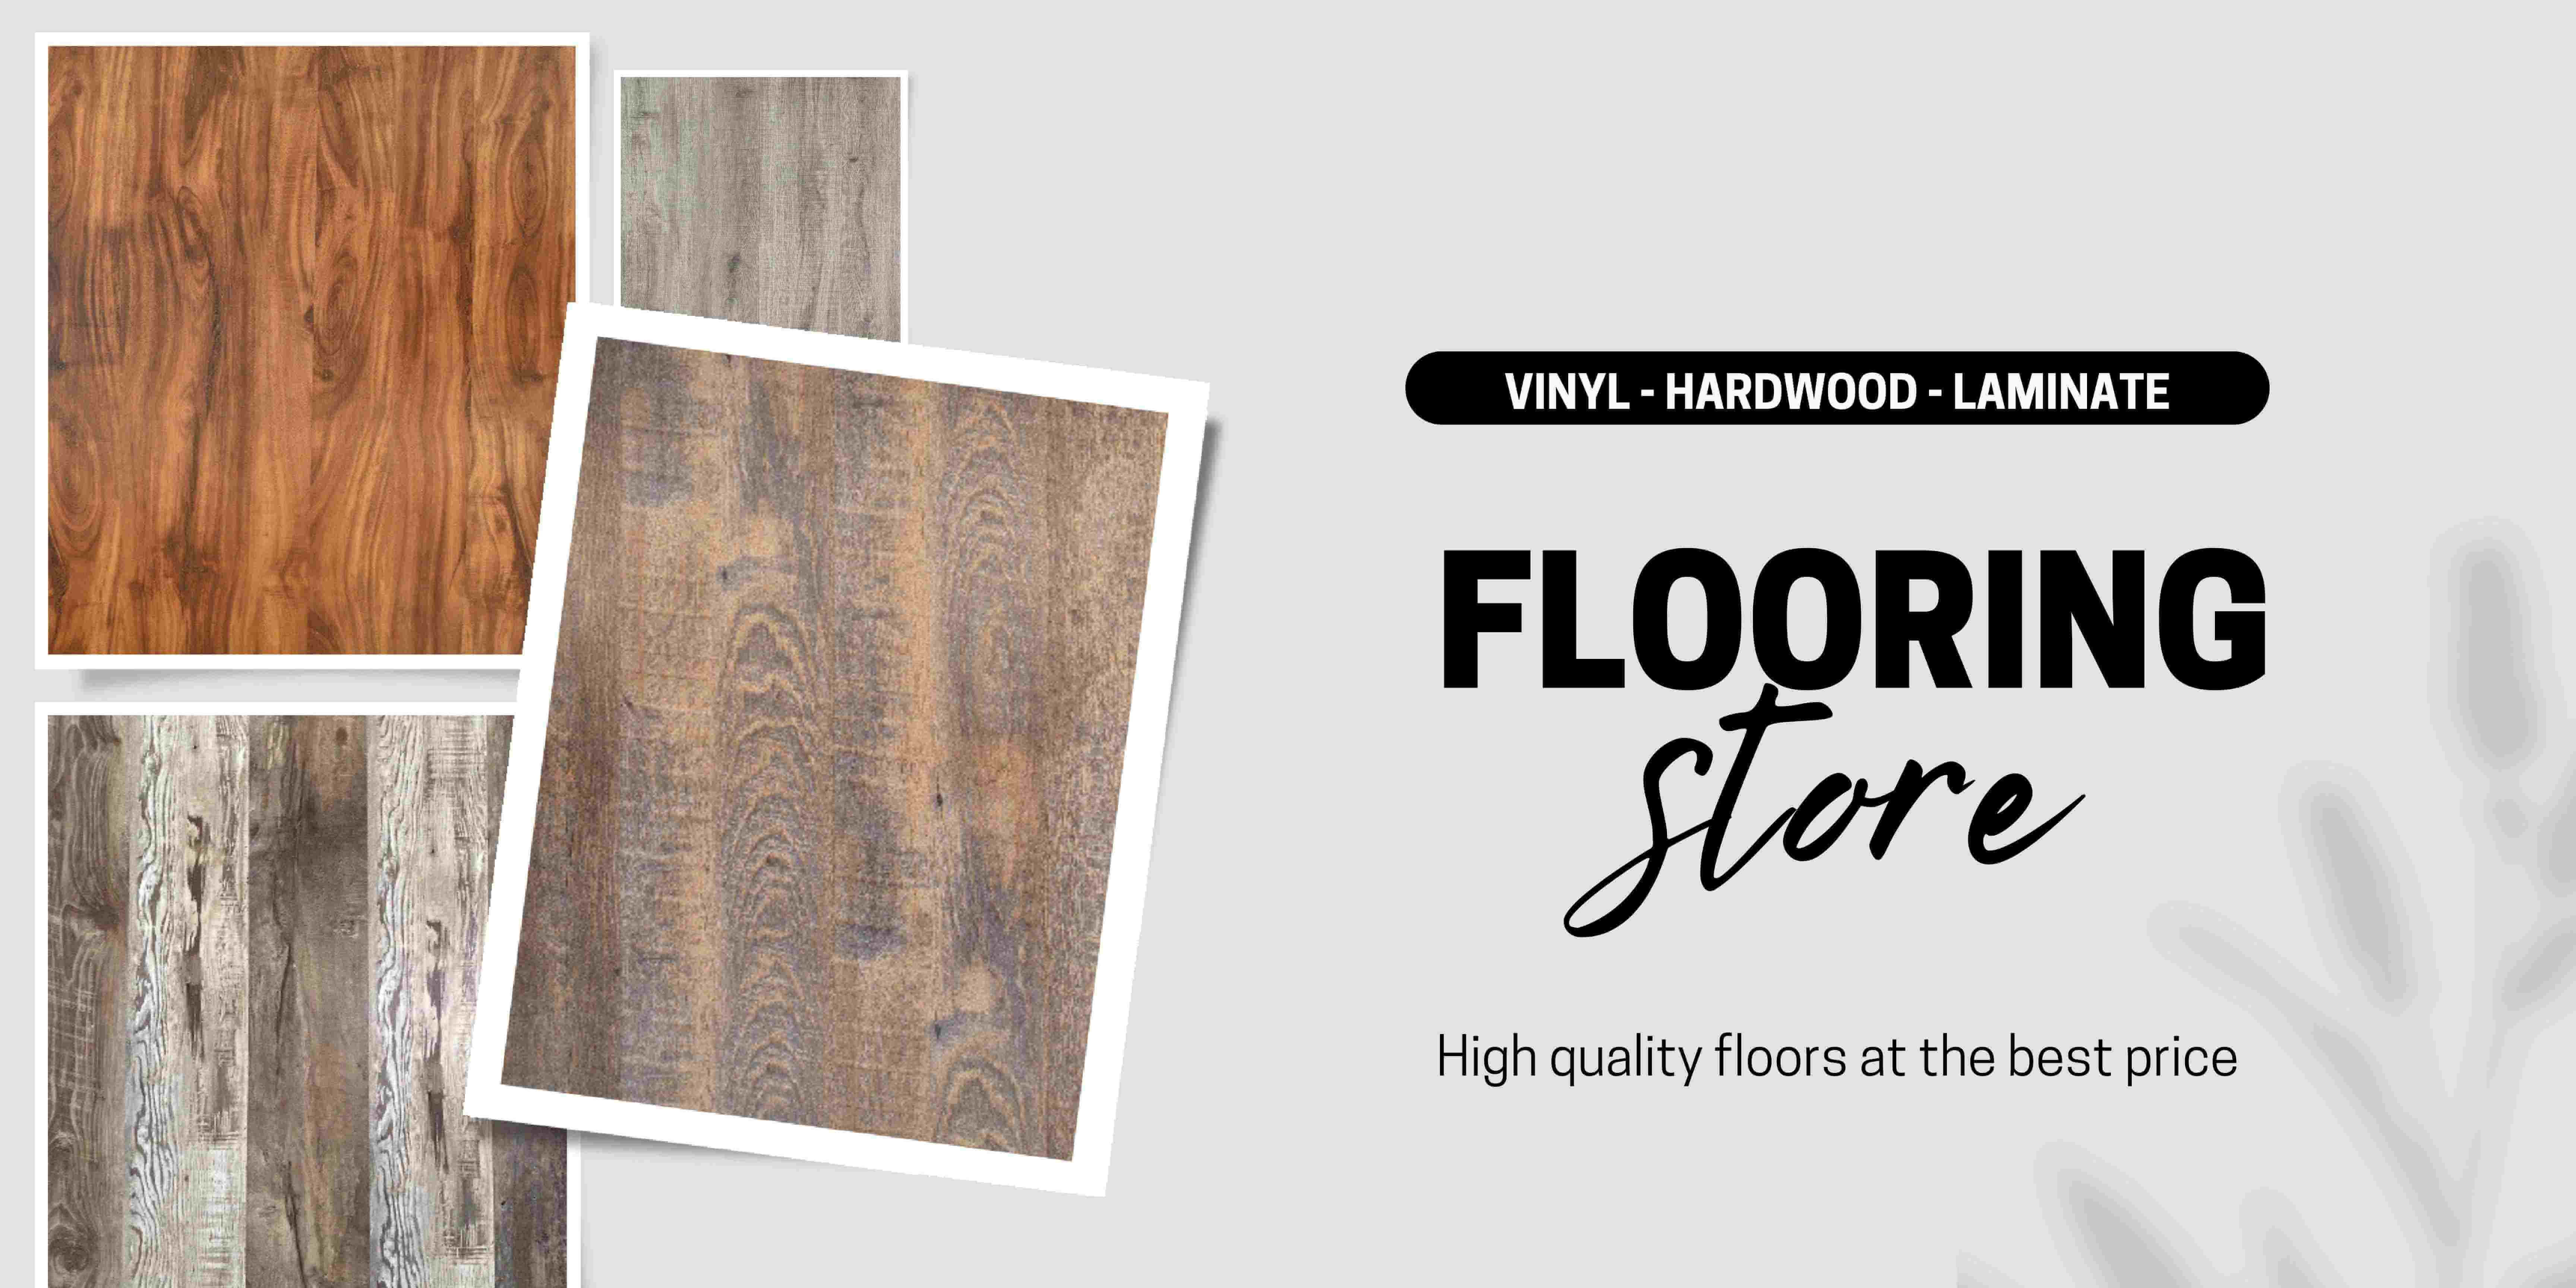 picture of our flooring store discount 25% off on all flooring products